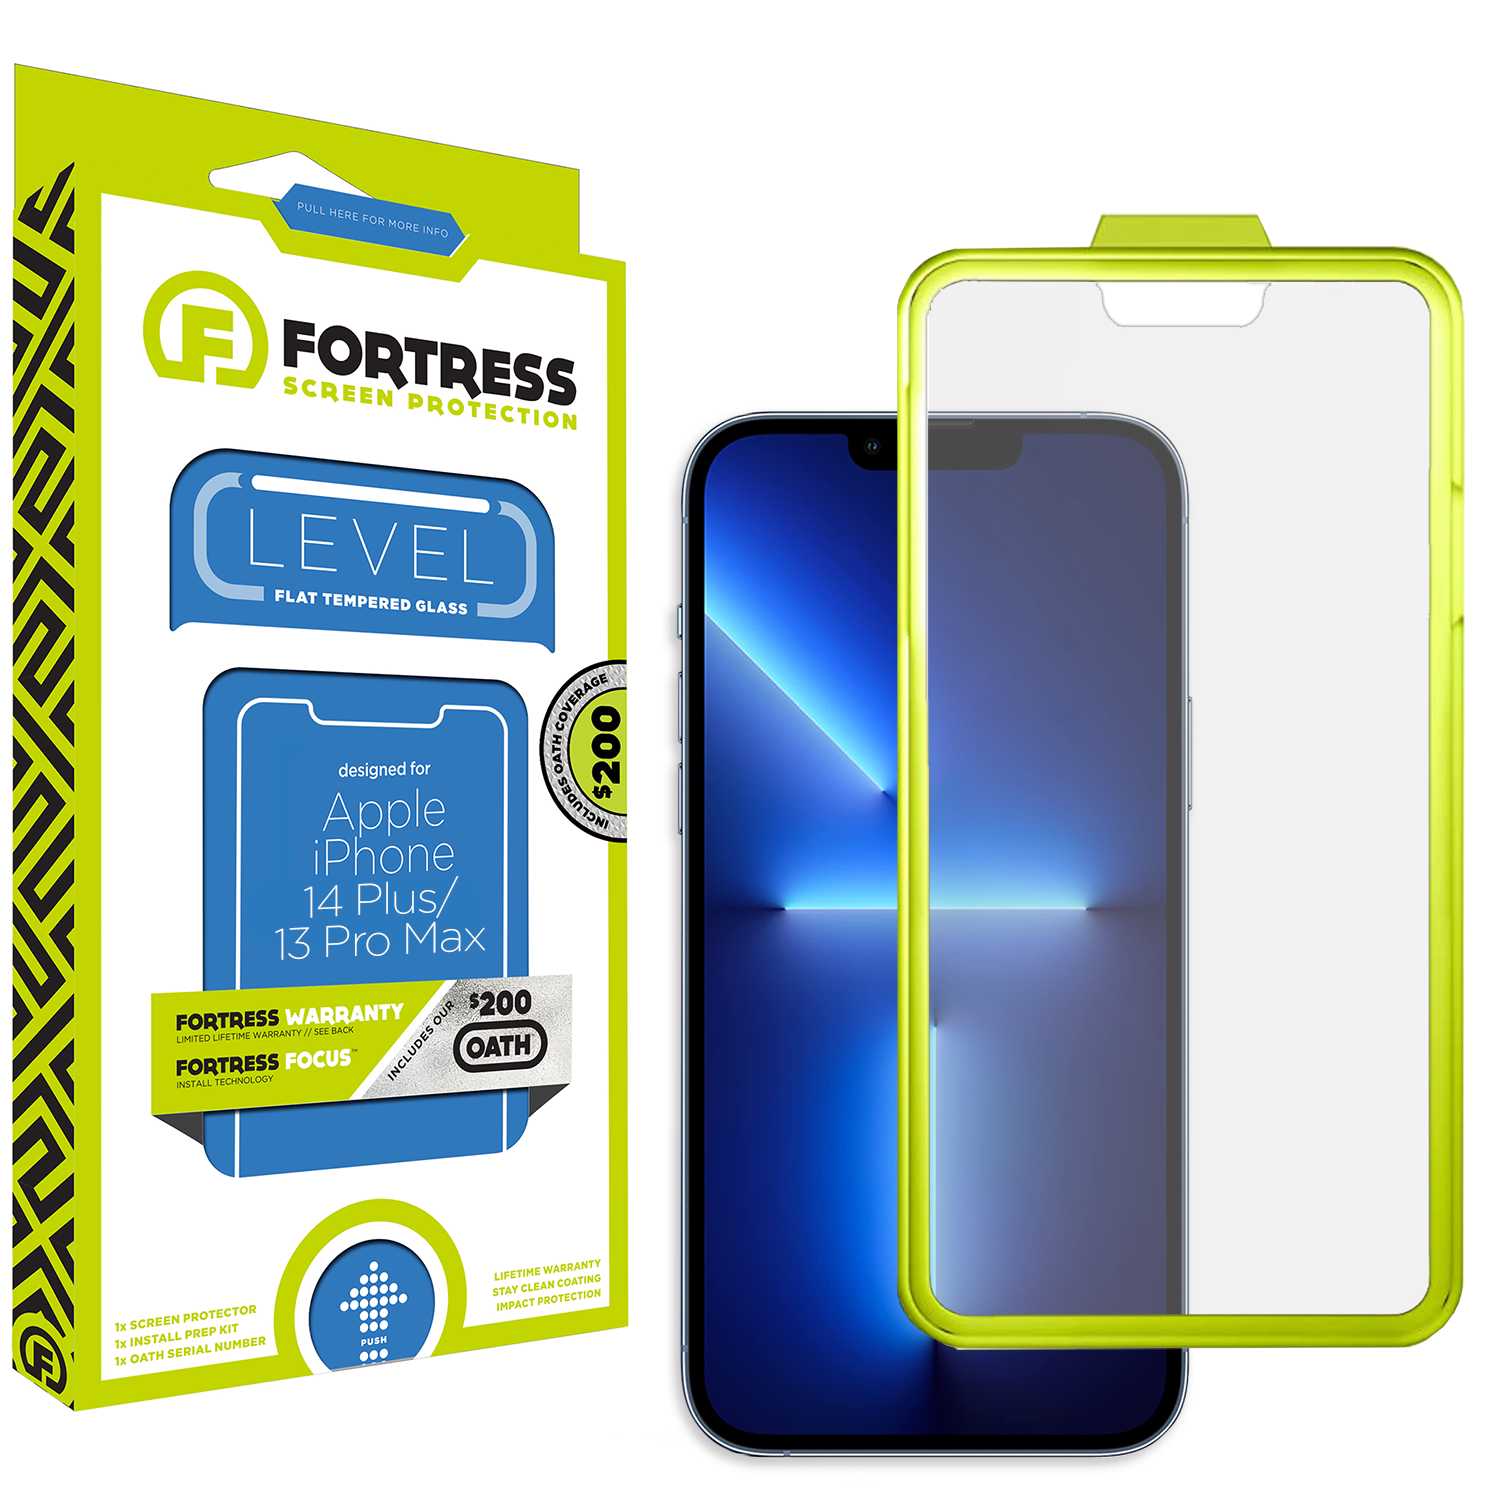 Fortress iPhone 14 Plus Screen Protector $200CoverageInstallTool Scooch Screen Protector